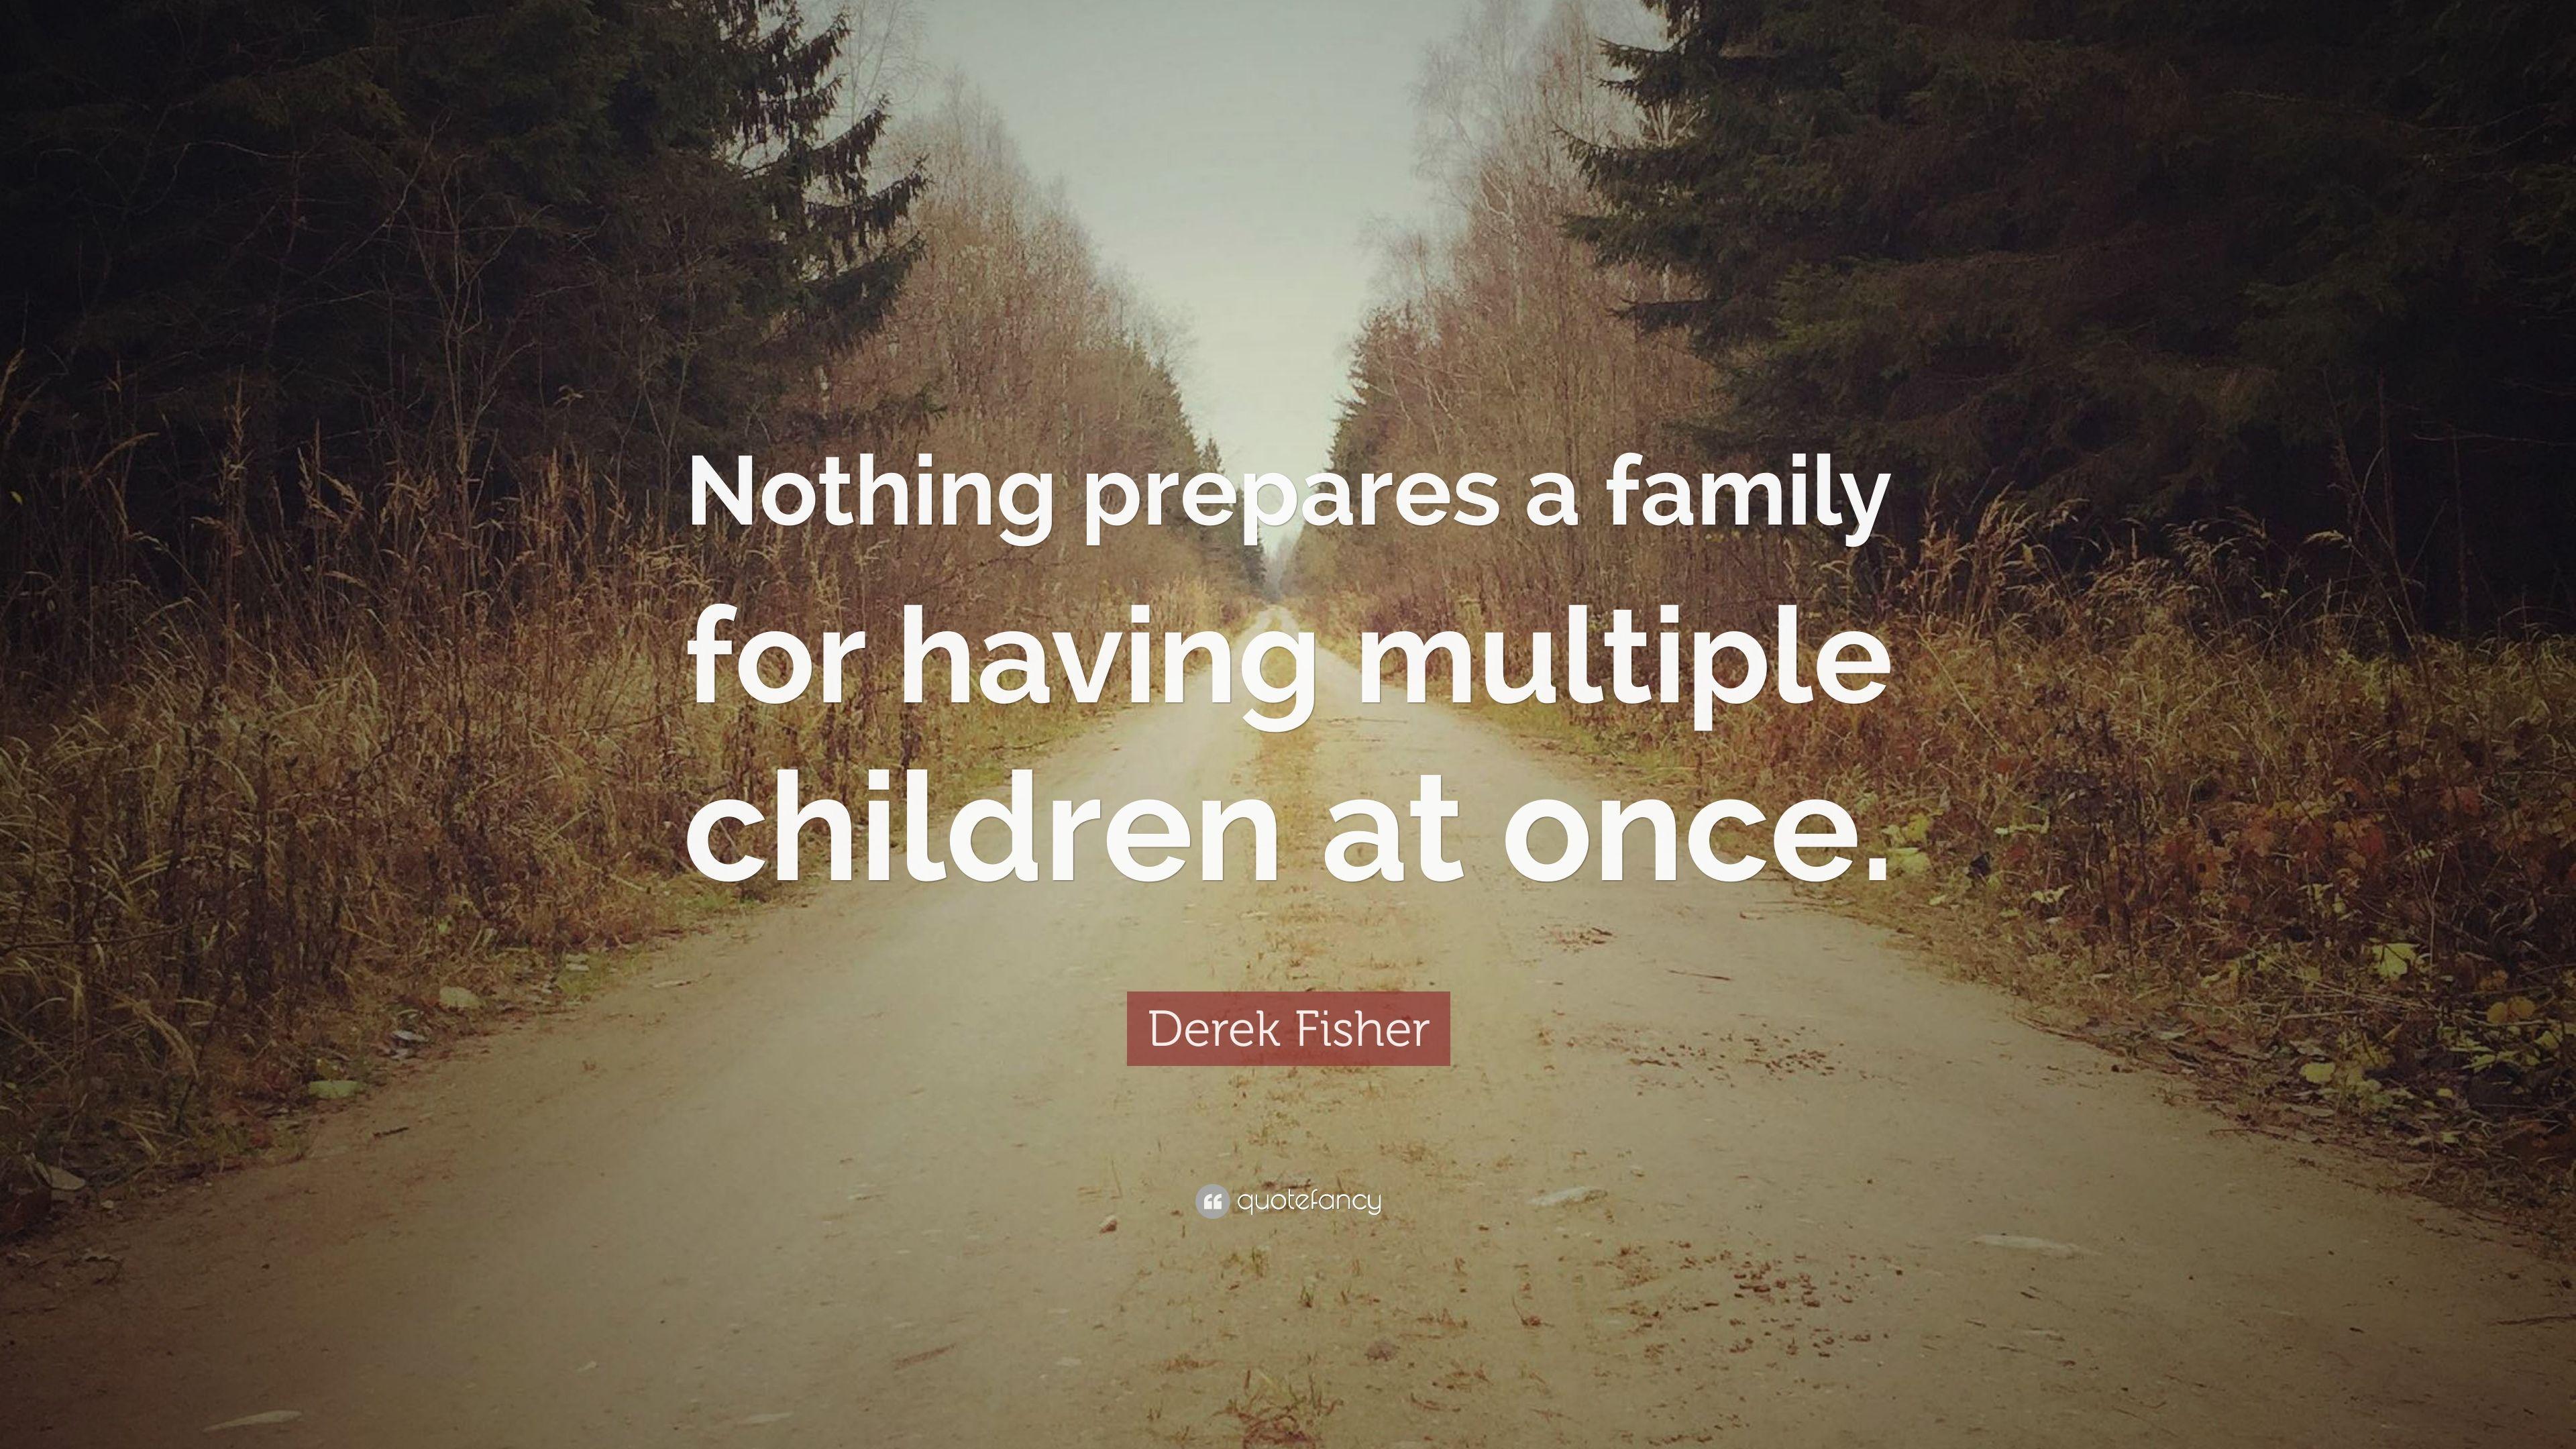 Derek Fisher Quote: “Nothing prepares a family for having multiple